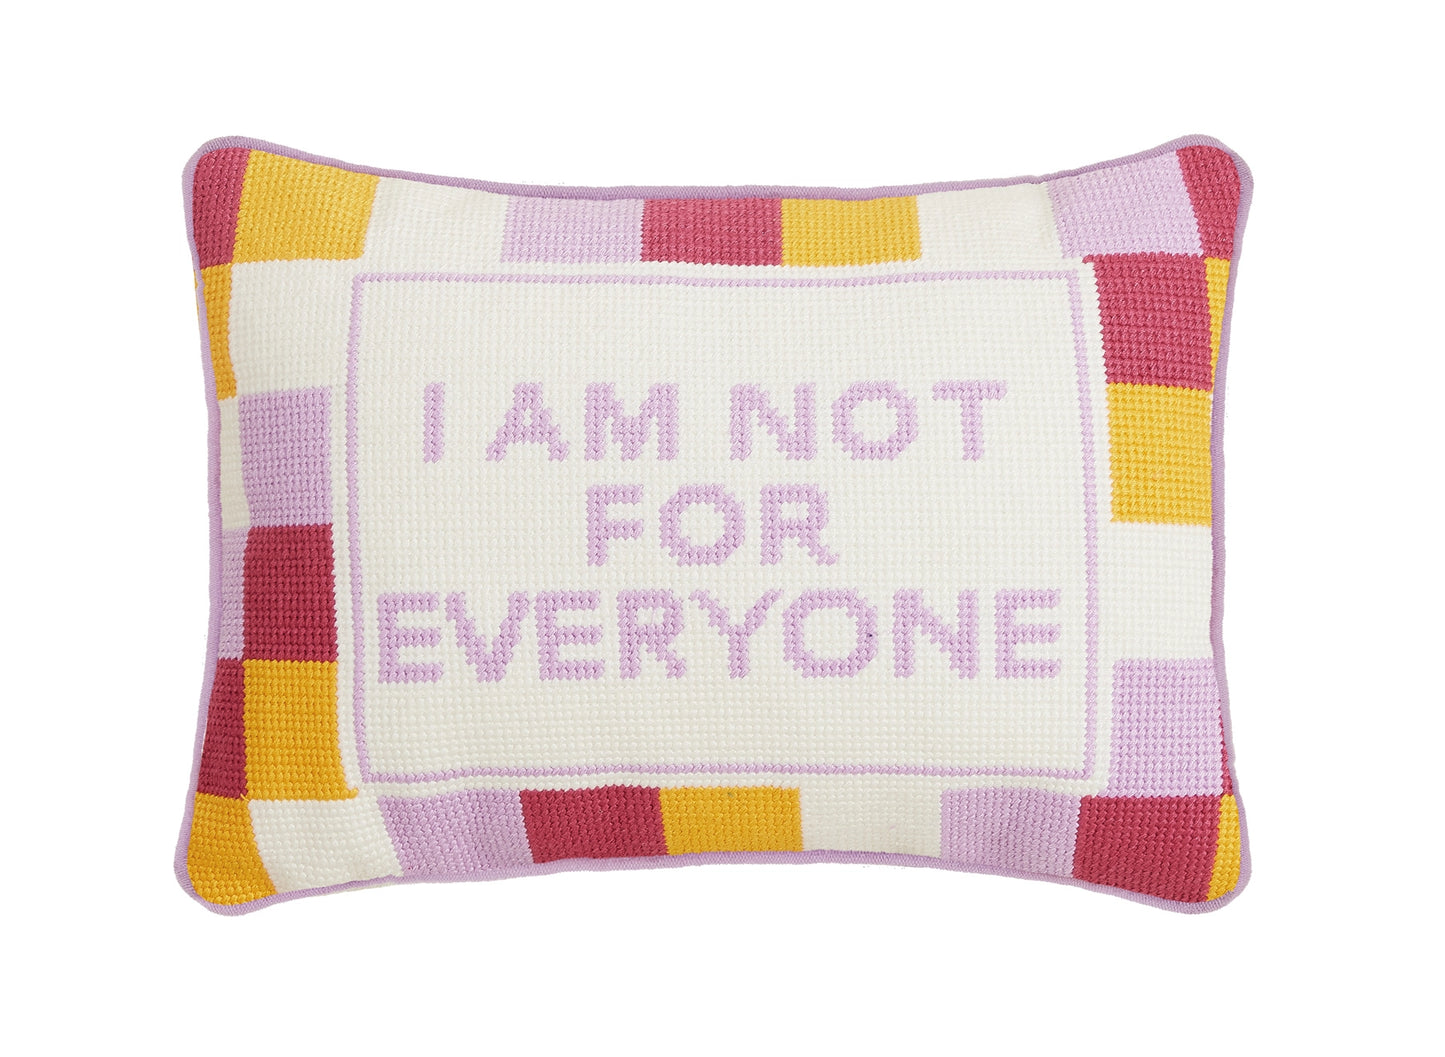 I Am Not For Everyone Needlepoint Pillow